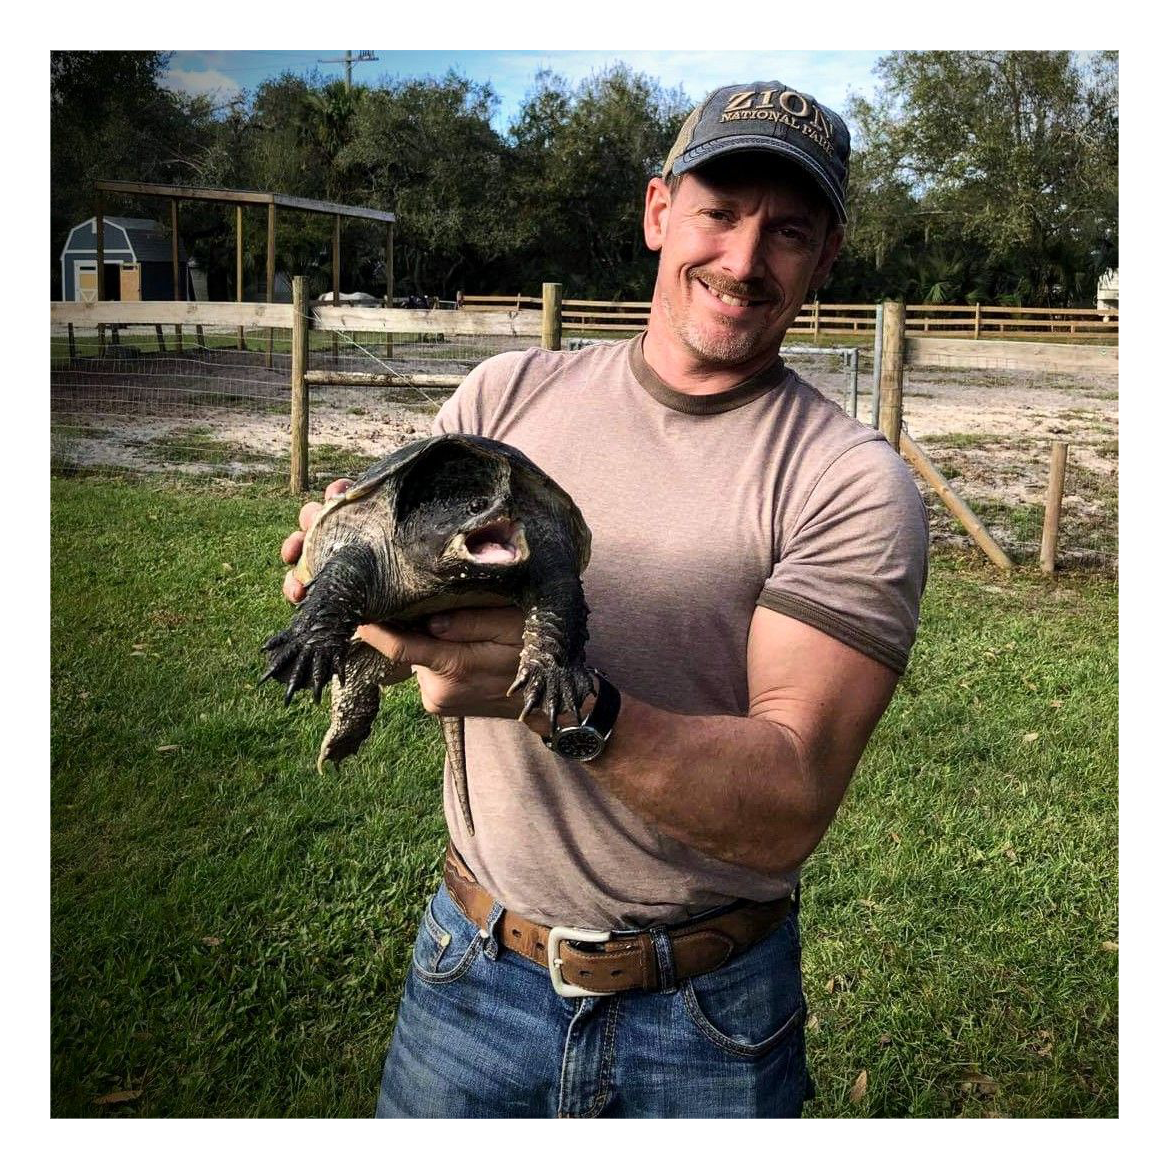 Joe holding Snapping Turtle